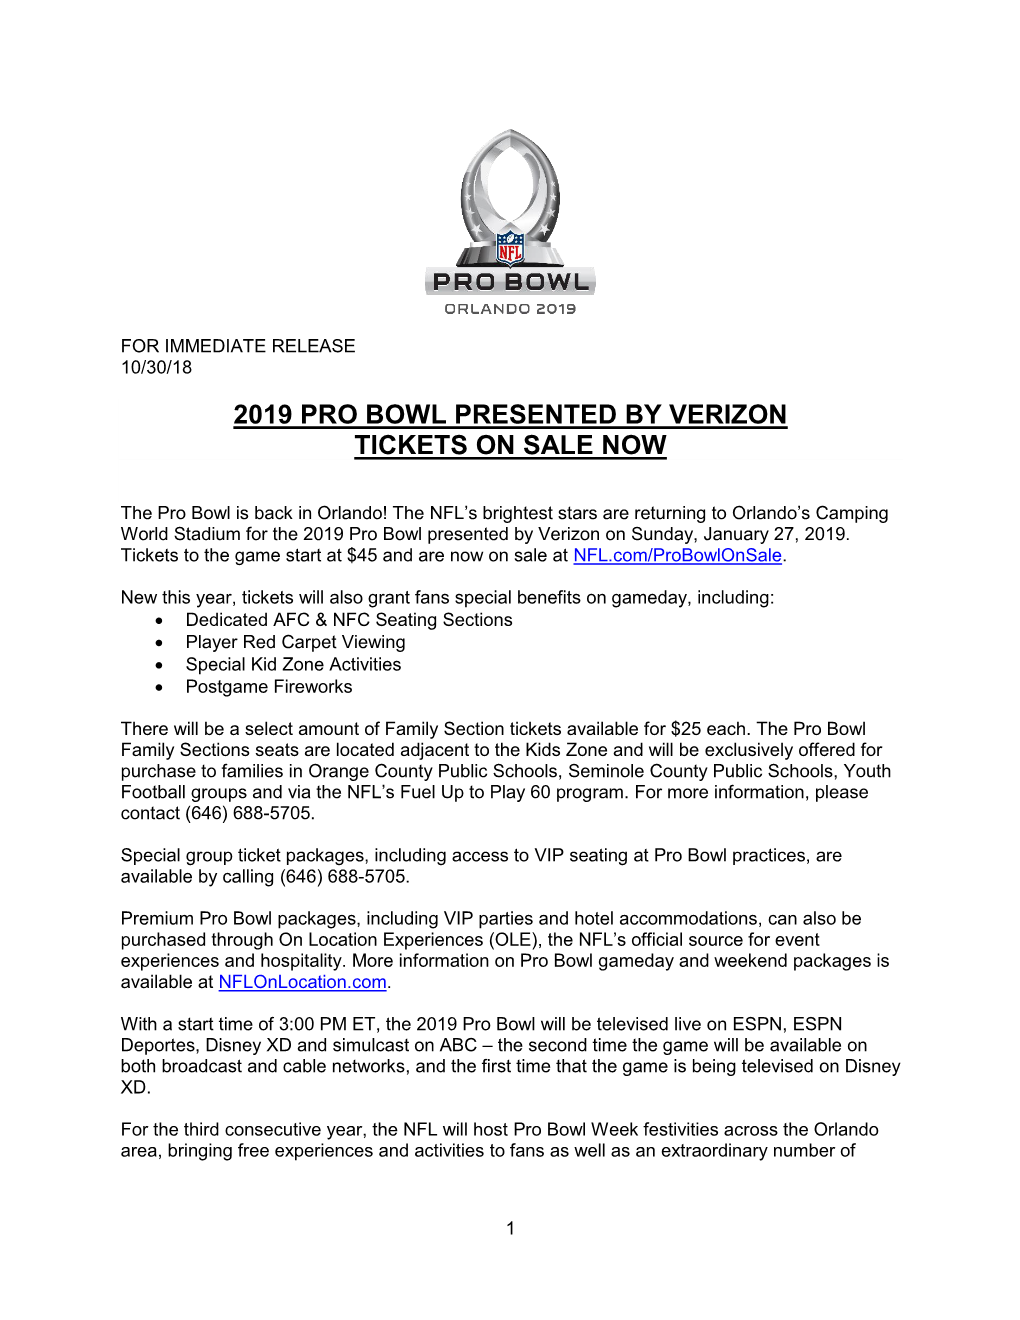 2019 Pro Bowl Presented by Verizon Tickets on Sale Now